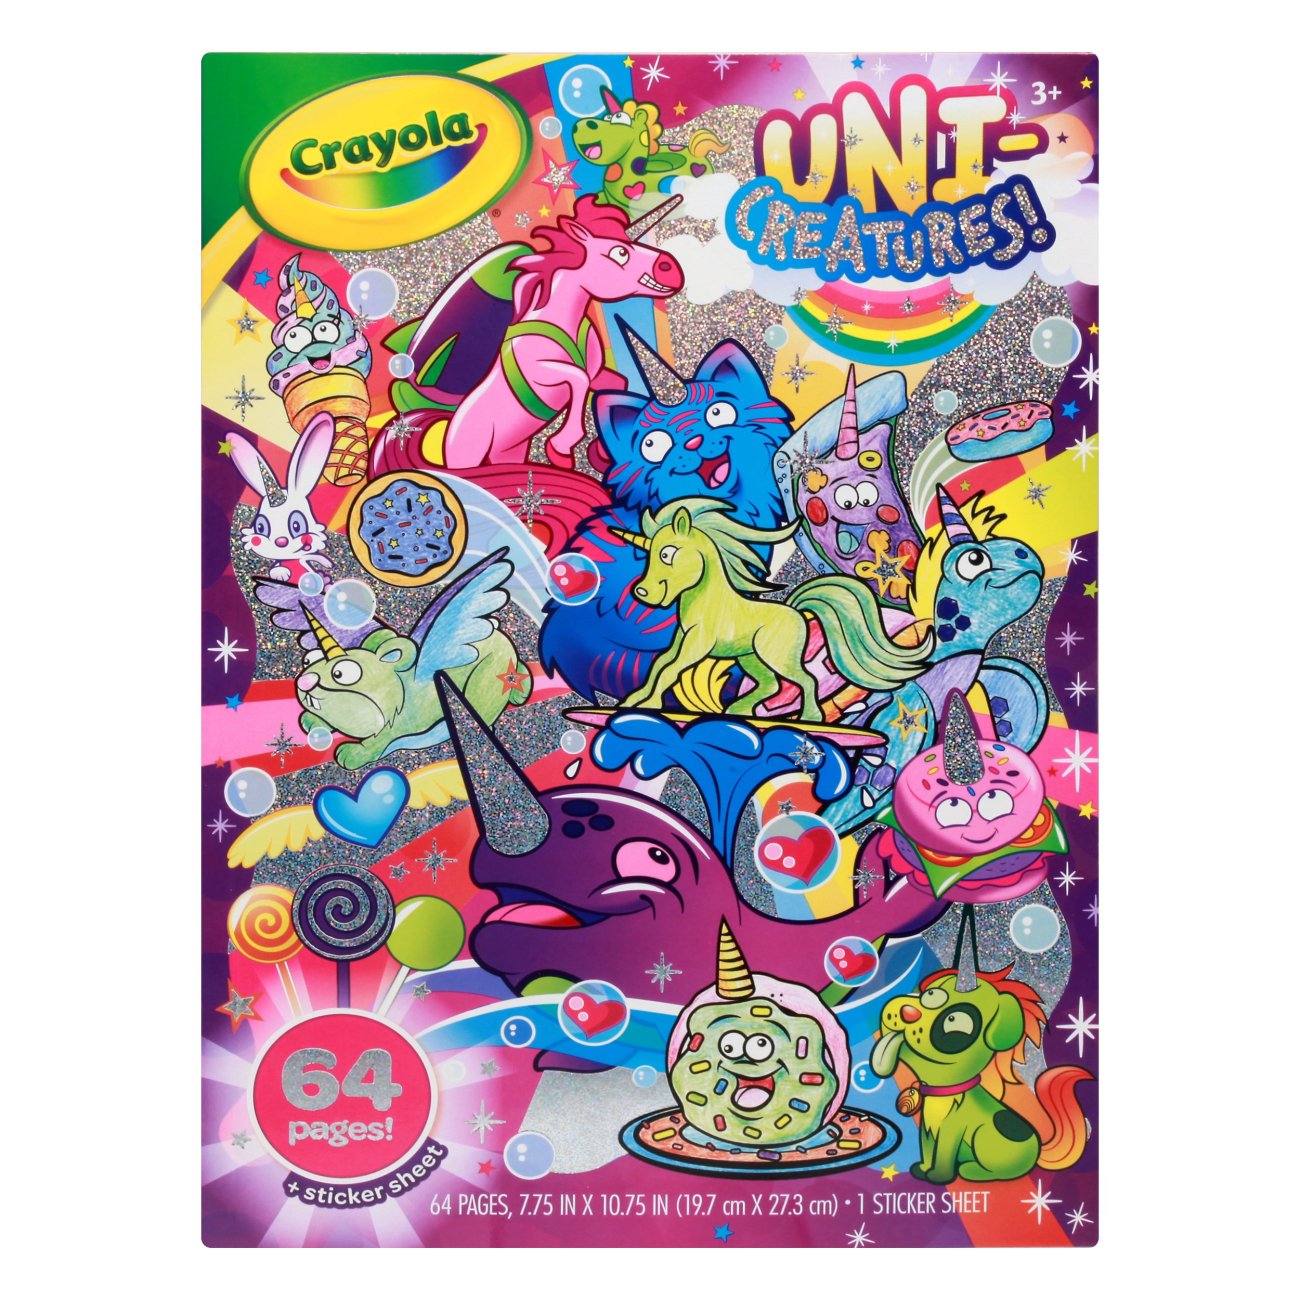 96 Unicorn Coloring Pages 4 6 Ages 3 5 Gift for Kids Multi Crayola Uni-Creatures Coloring Book 